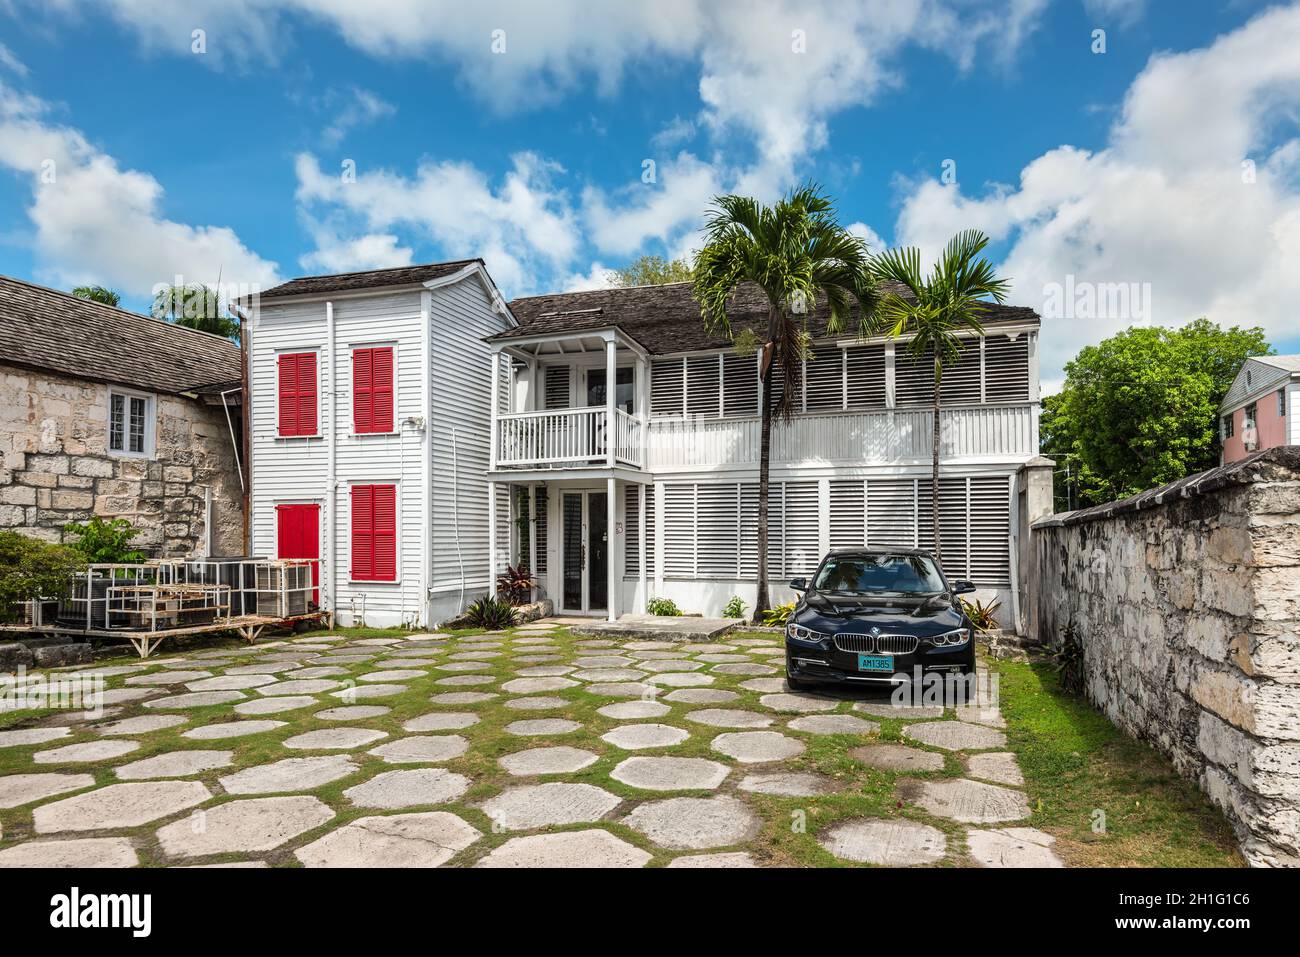 Nassau, Bahamas - May 3, 2019: Street view of Nassau at day with a car in the yard near a typical residential building in Nassau, New Providence, Baha Stock Photo